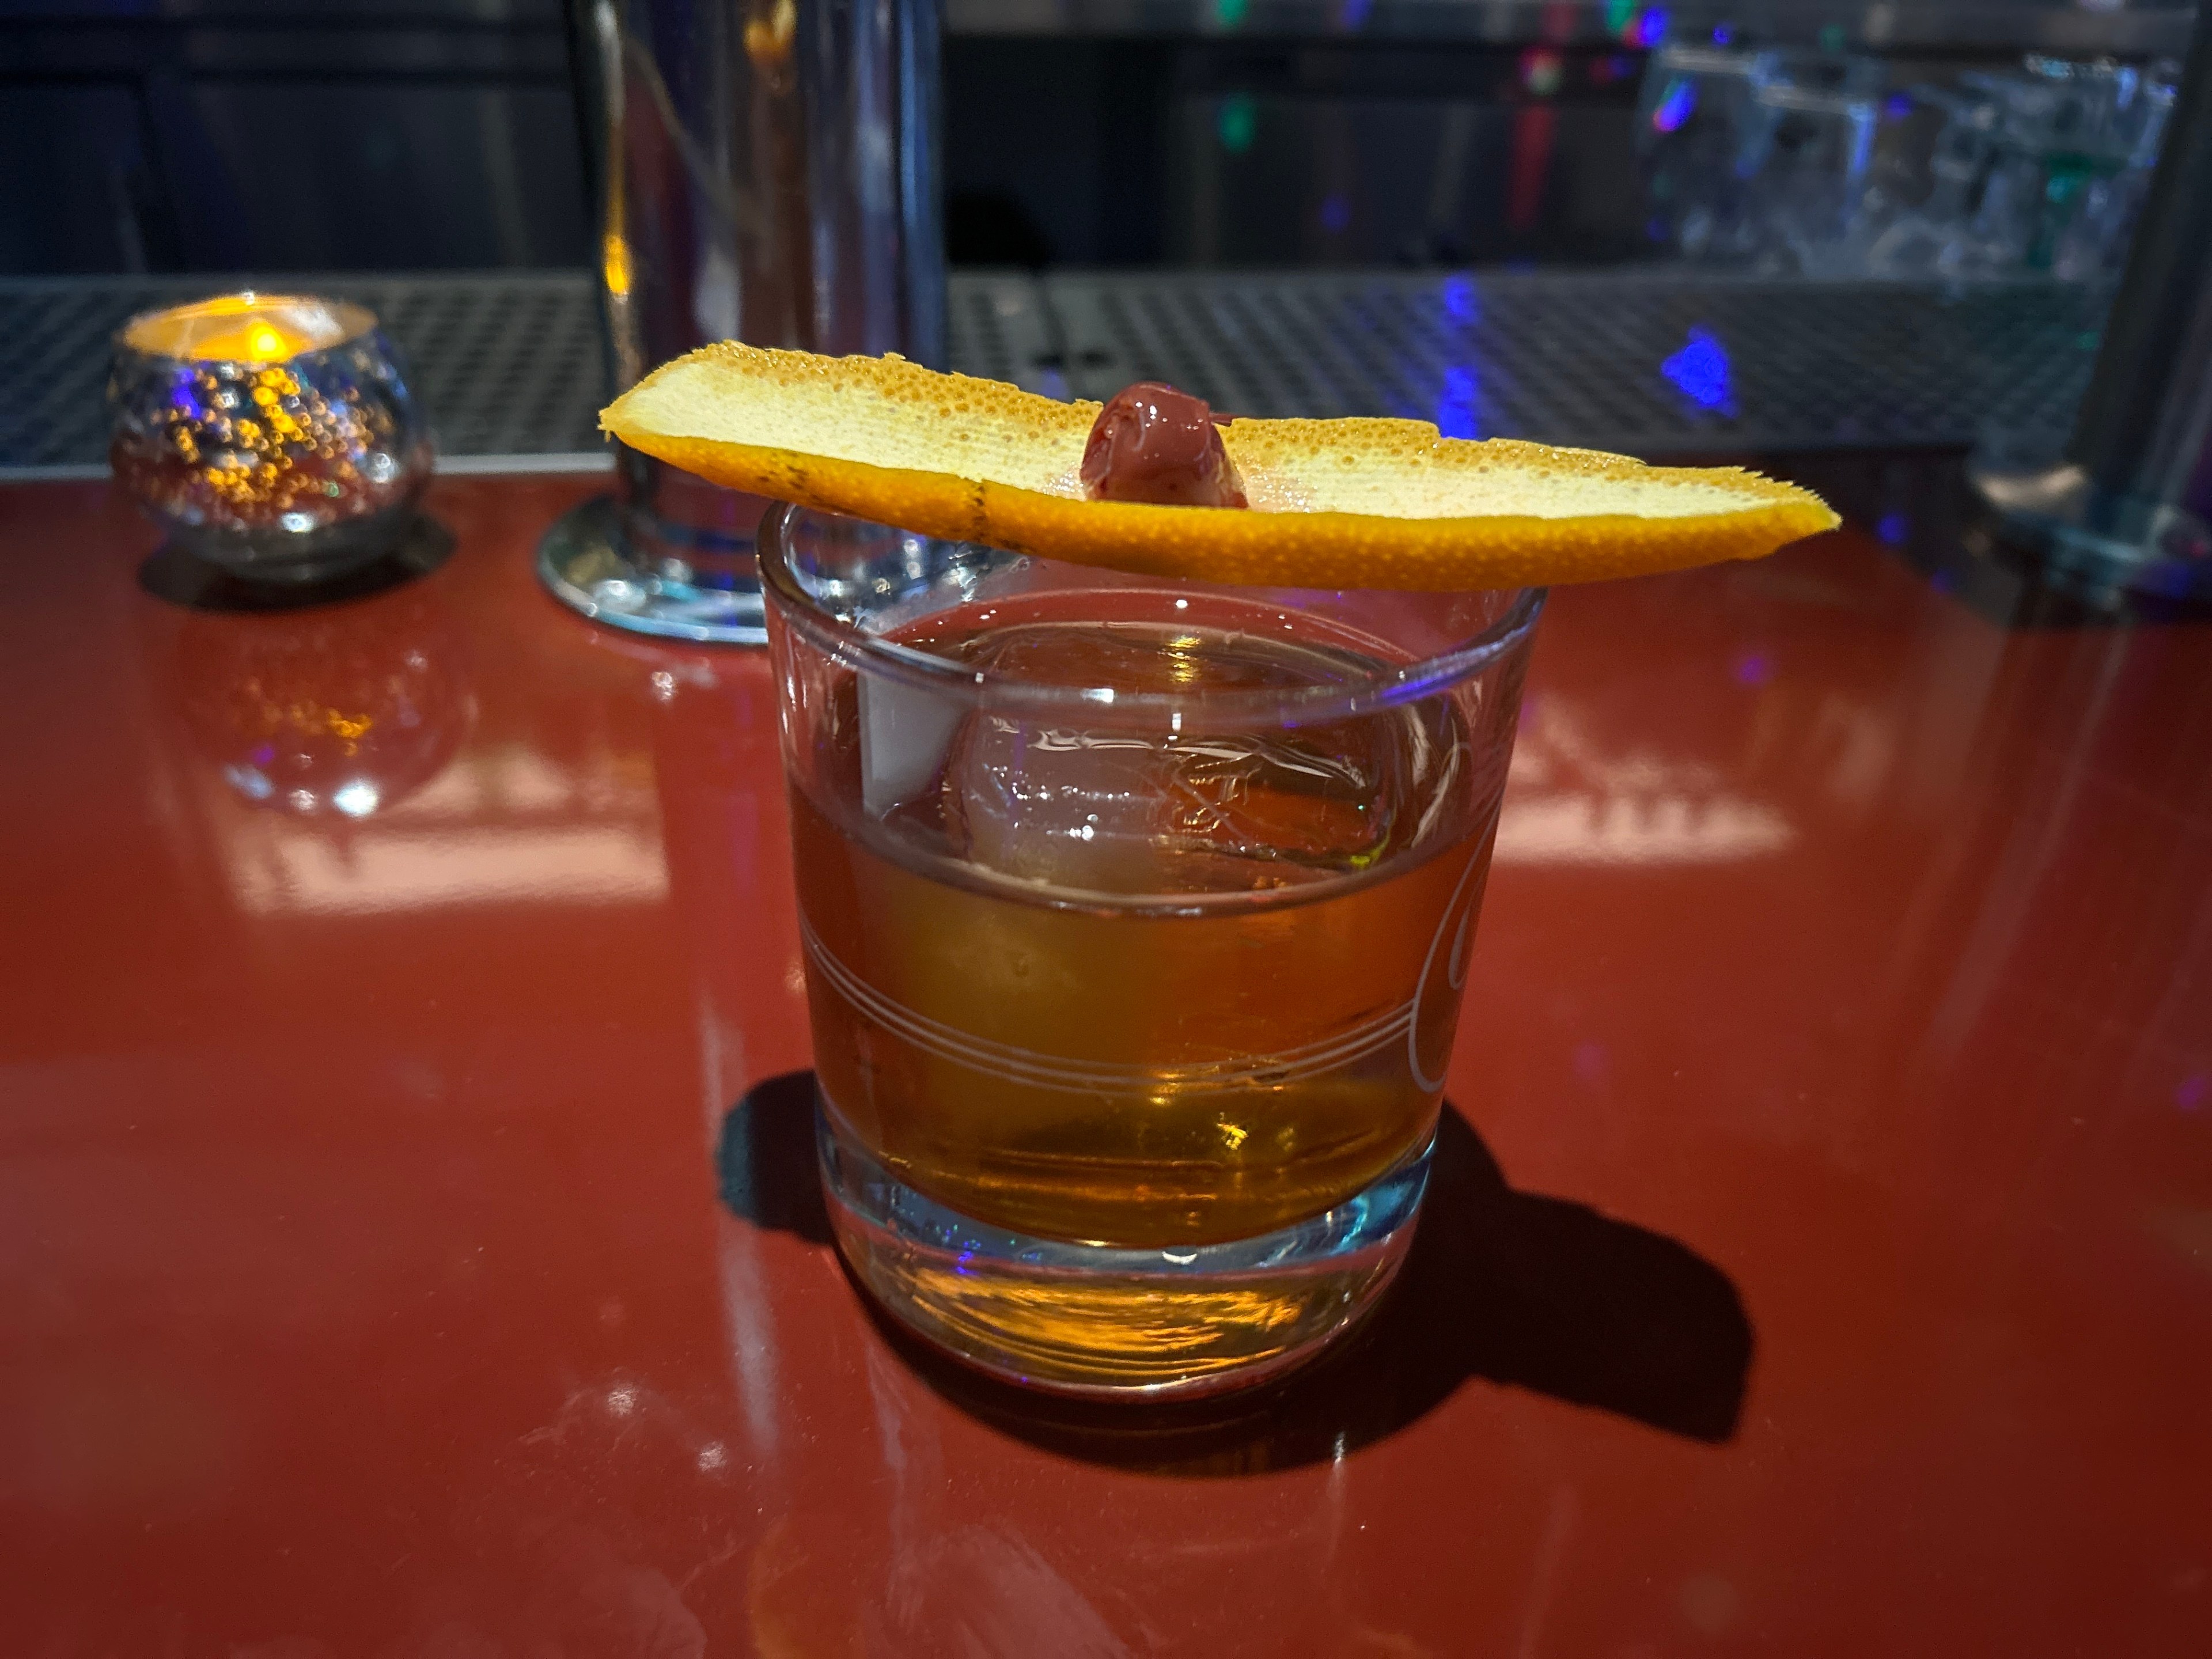 A brown cocktail on the rocks garnished with an orange peel sits on a red bar.